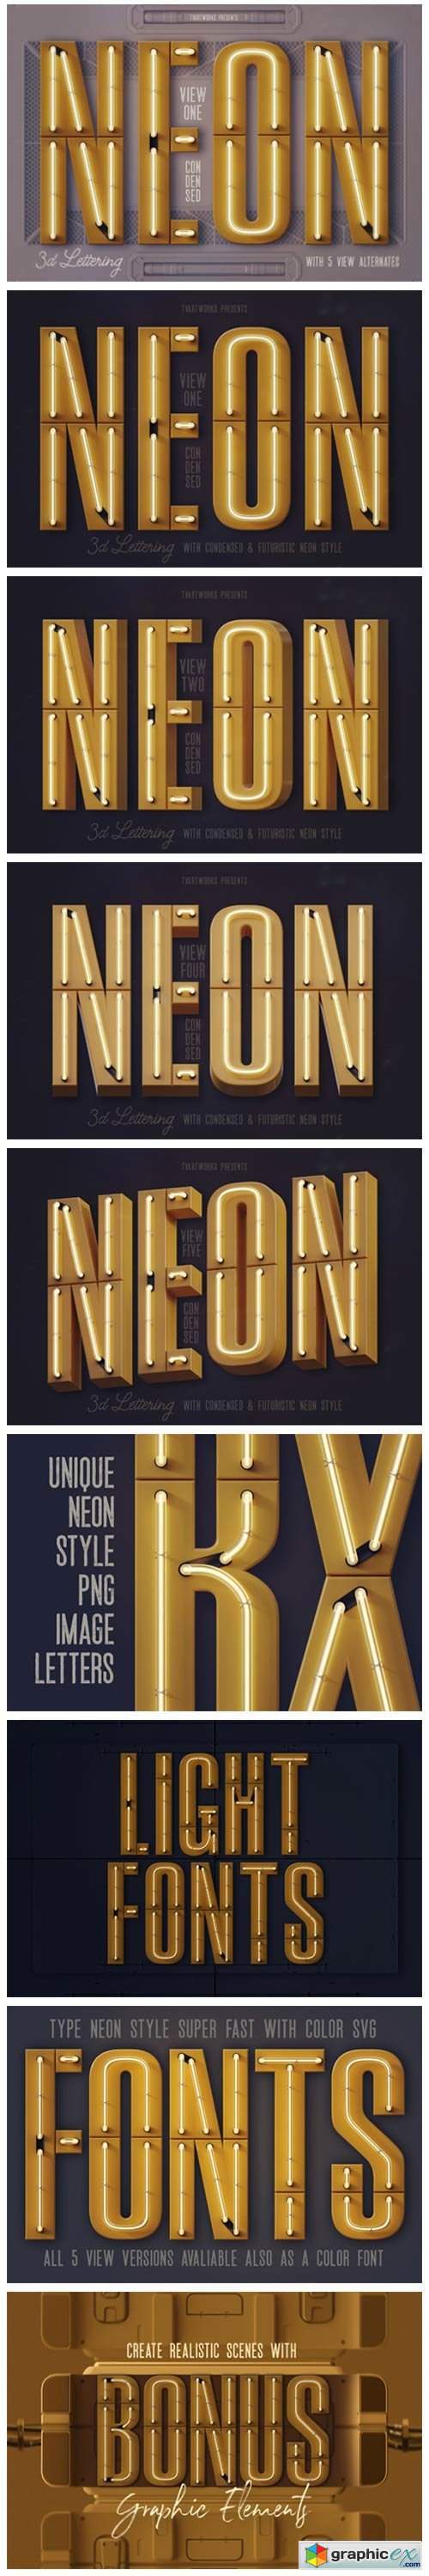 Condensed Neon 3D Lettering